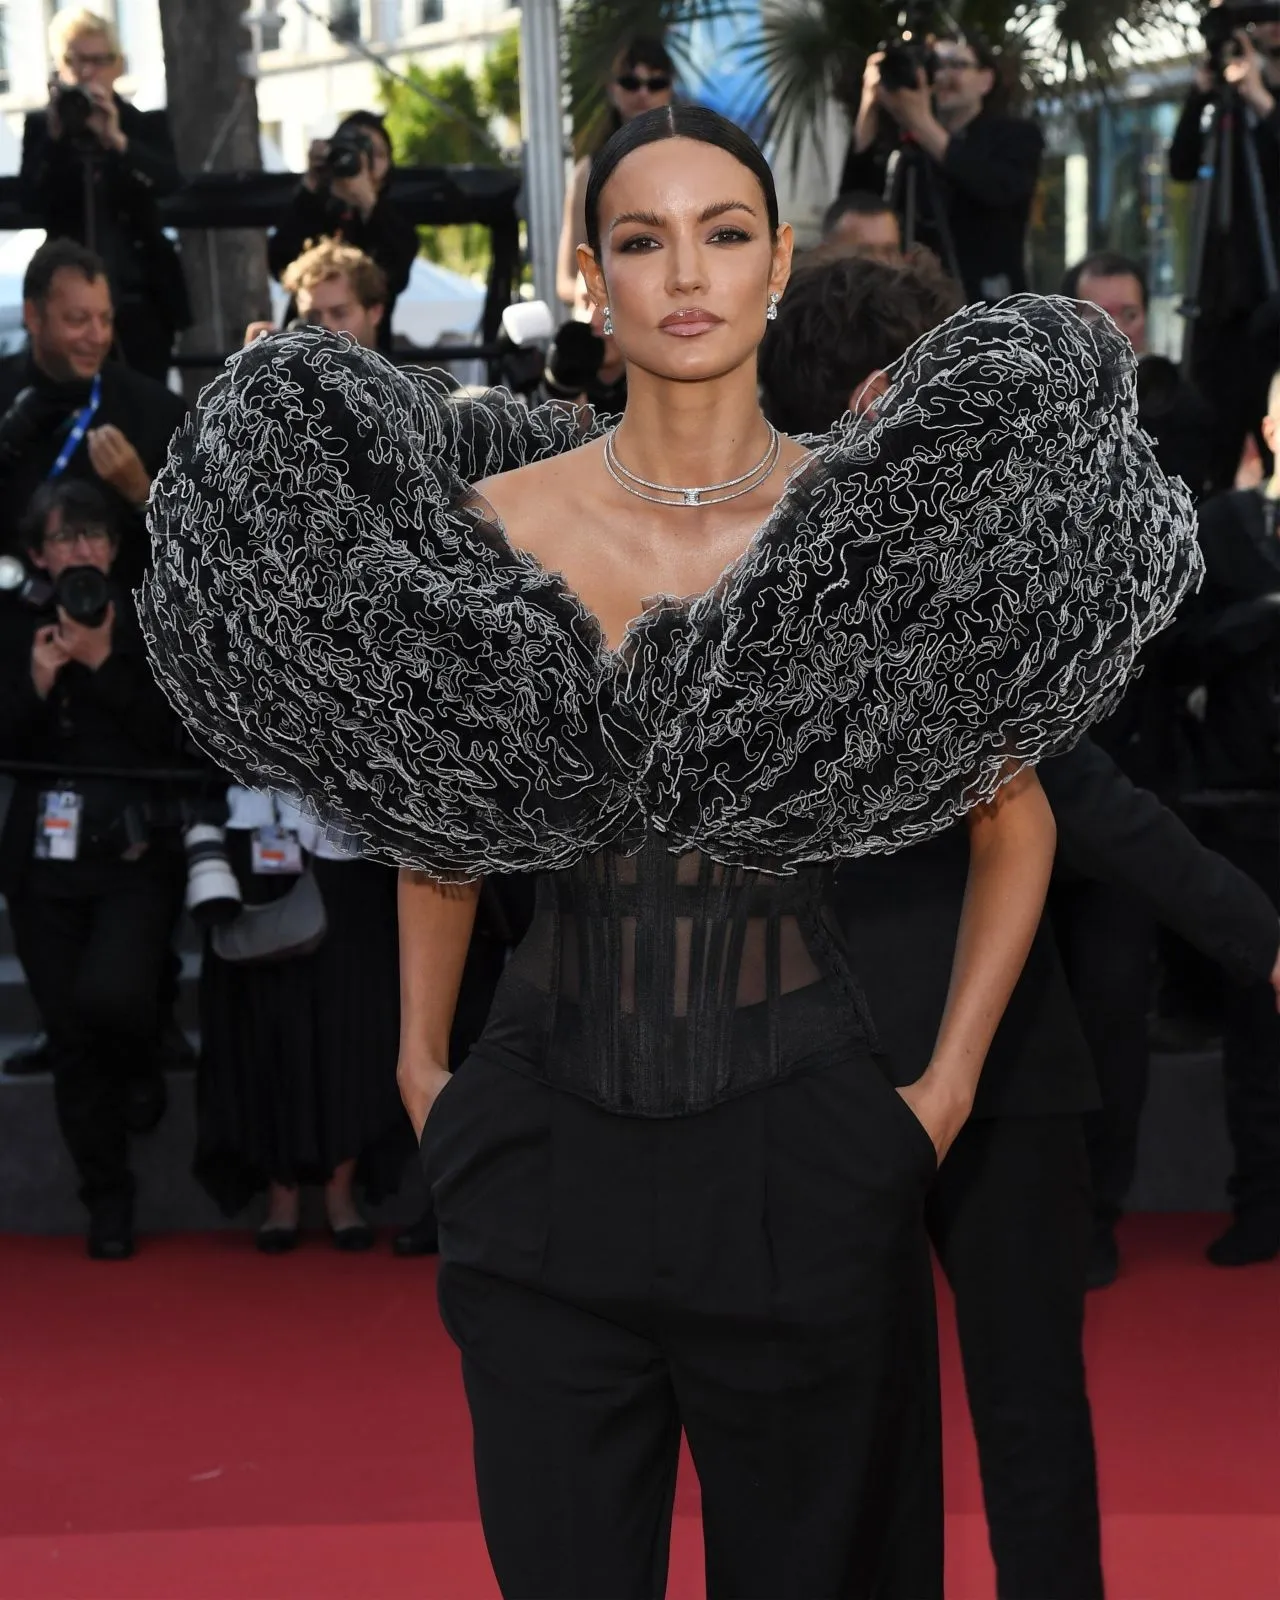 SOFIA RESING AT THE COUNT OF MONTE CRISTO PREMIERE AT CANNES FILM FESTIVAL